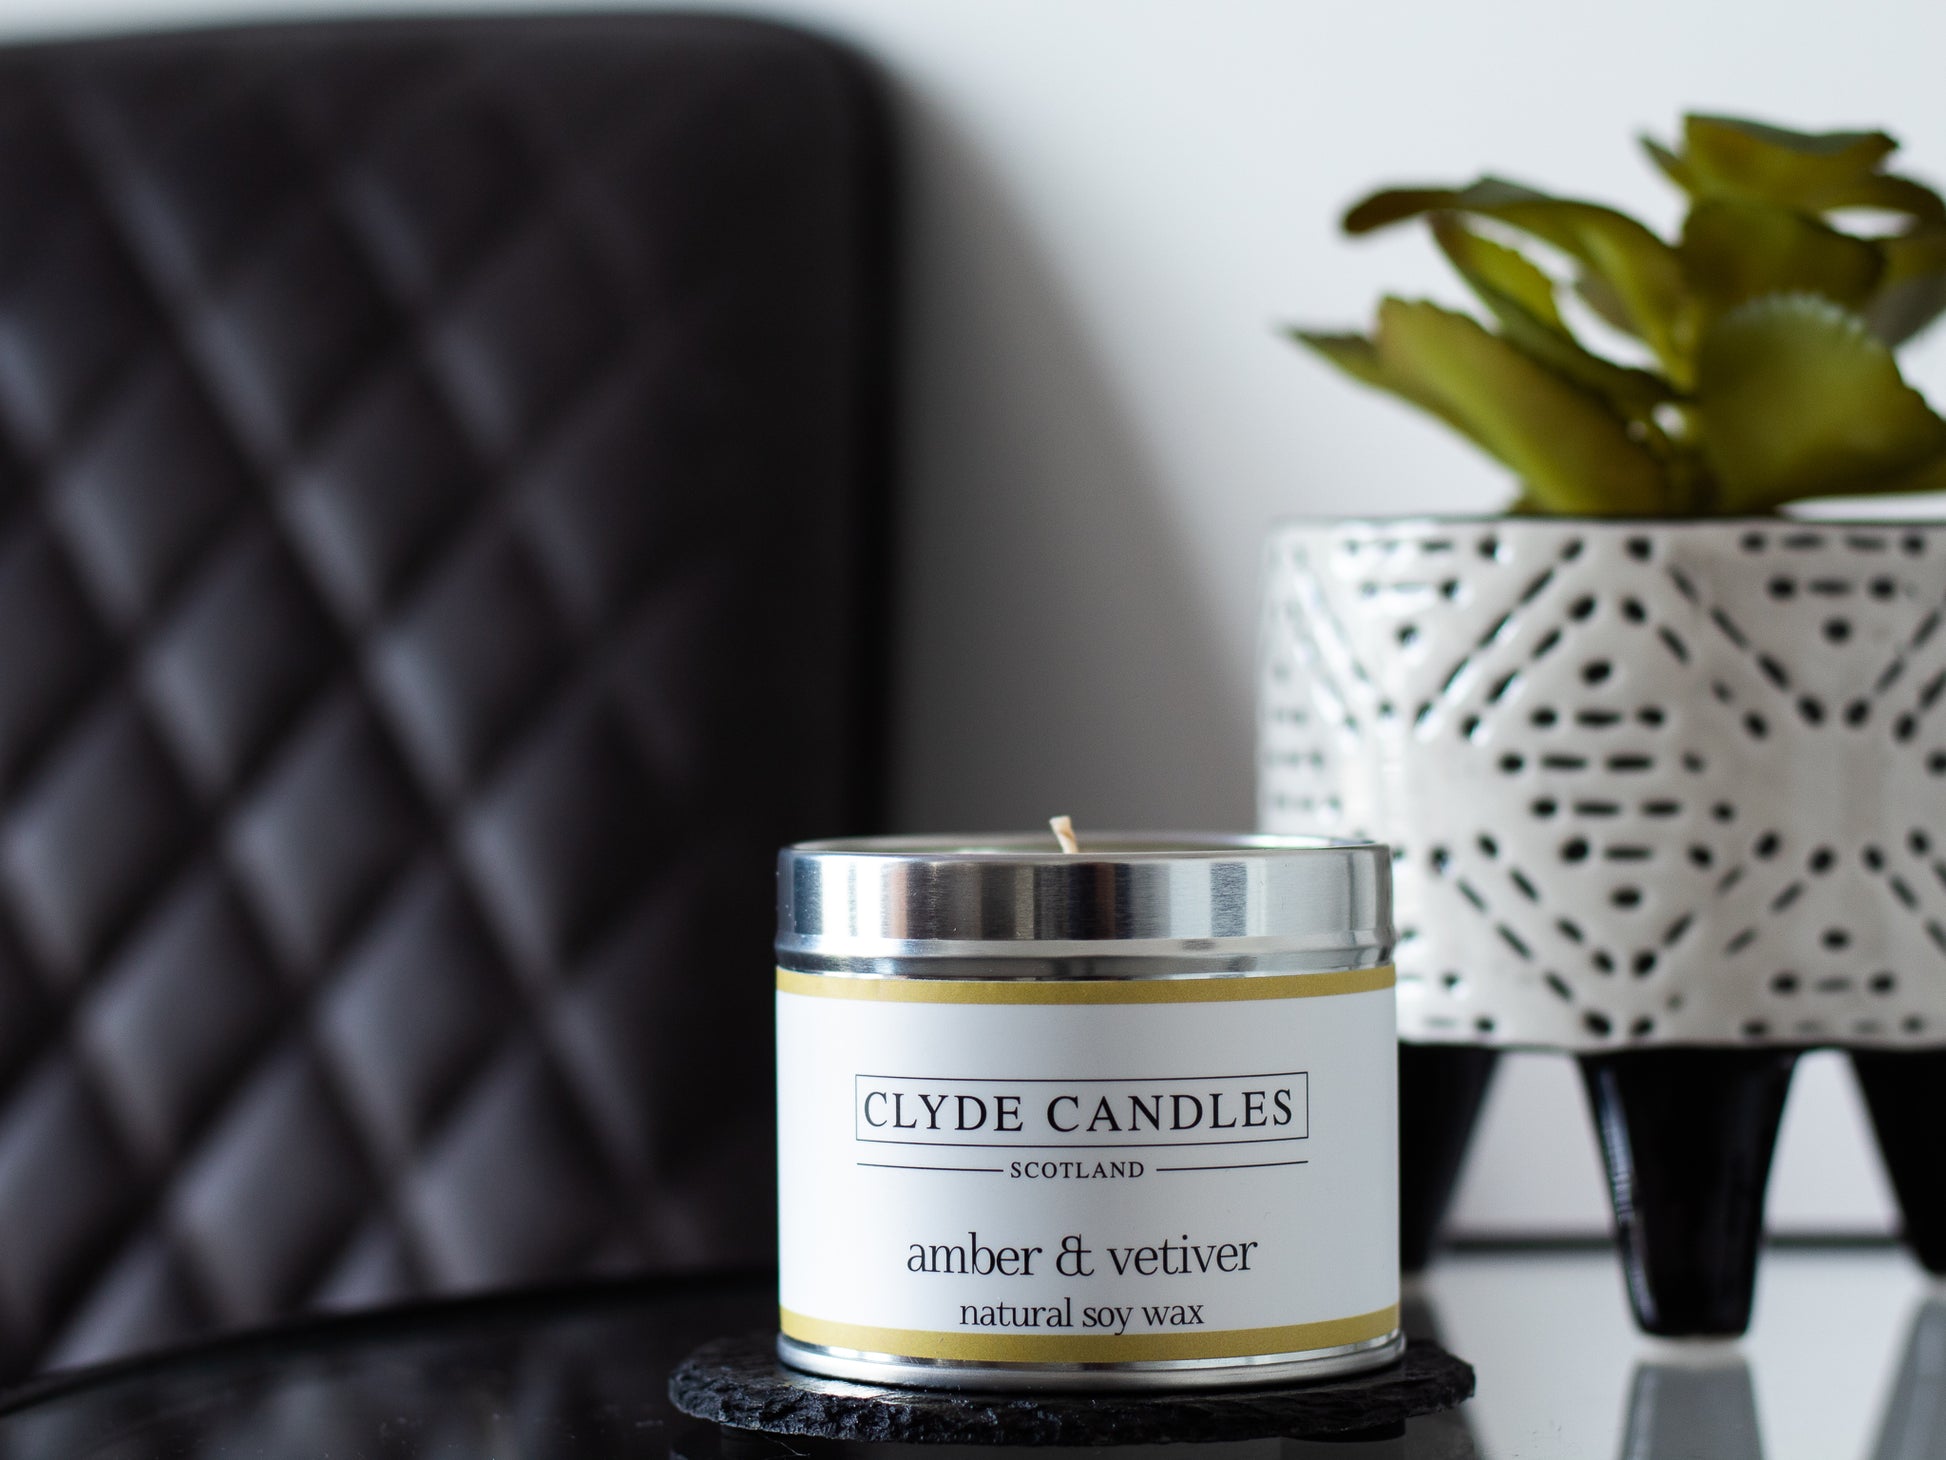 Amber & Vetiver Scented Candle Tin, Natural Soy wax, Scottish Candles, Clyde Candles